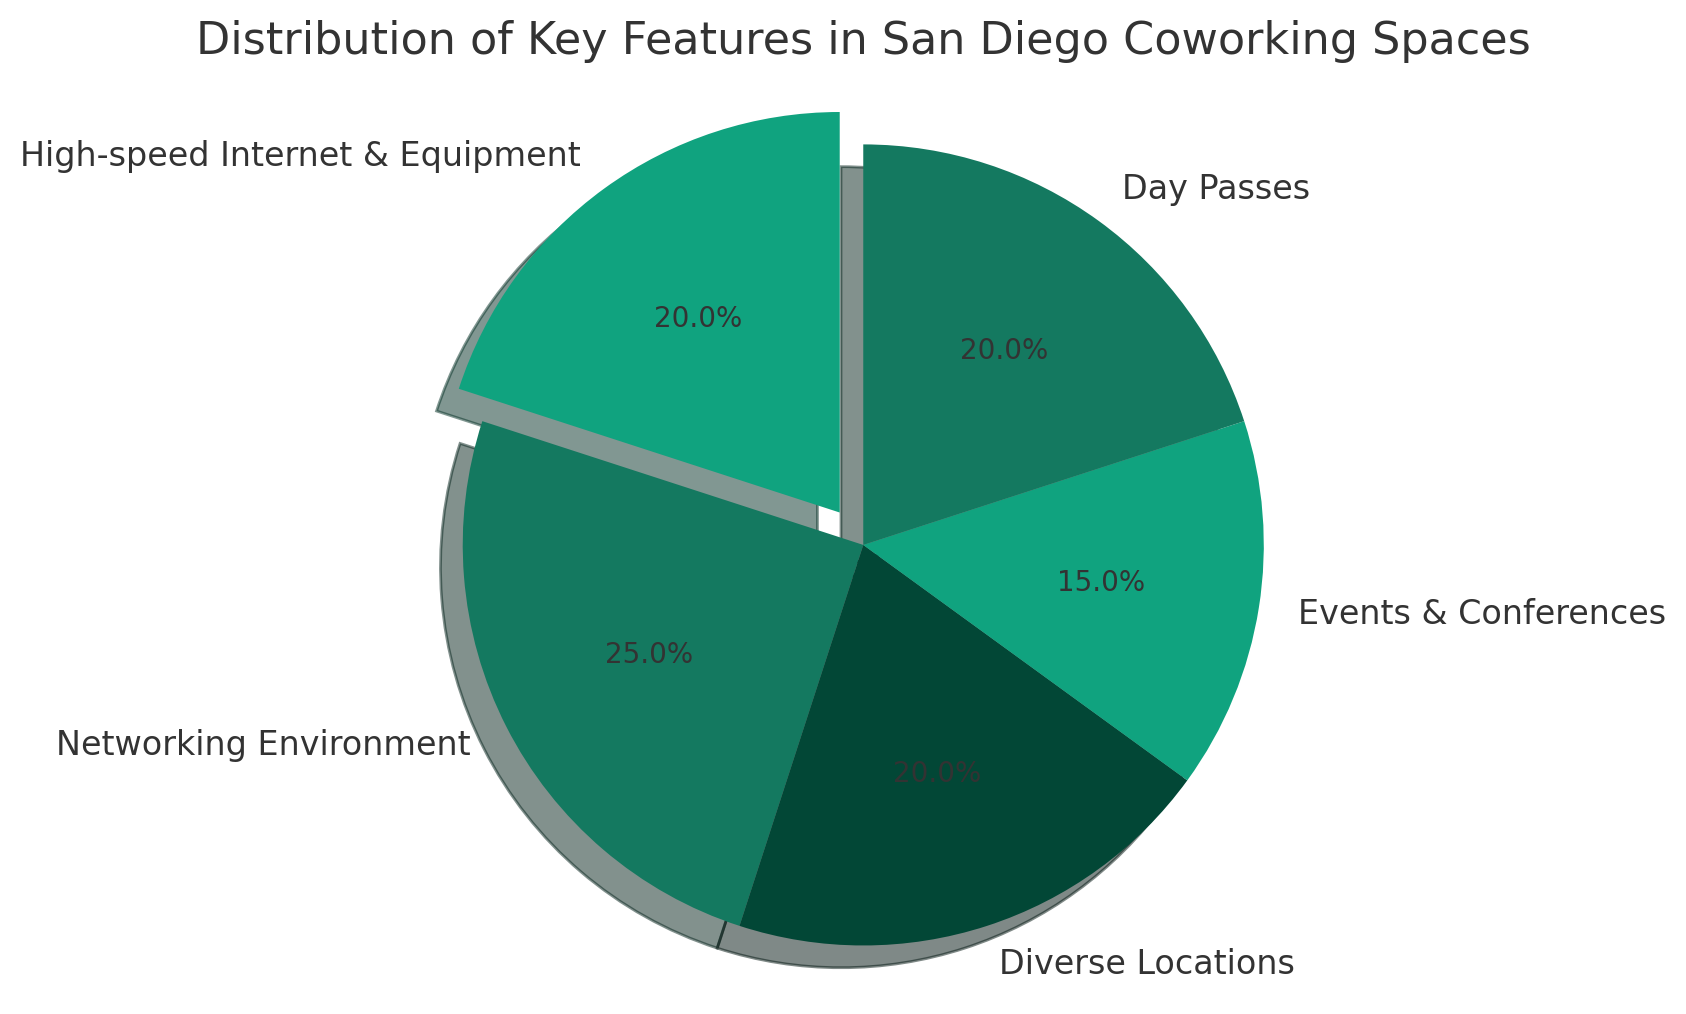 San Diego Co-working Spaces